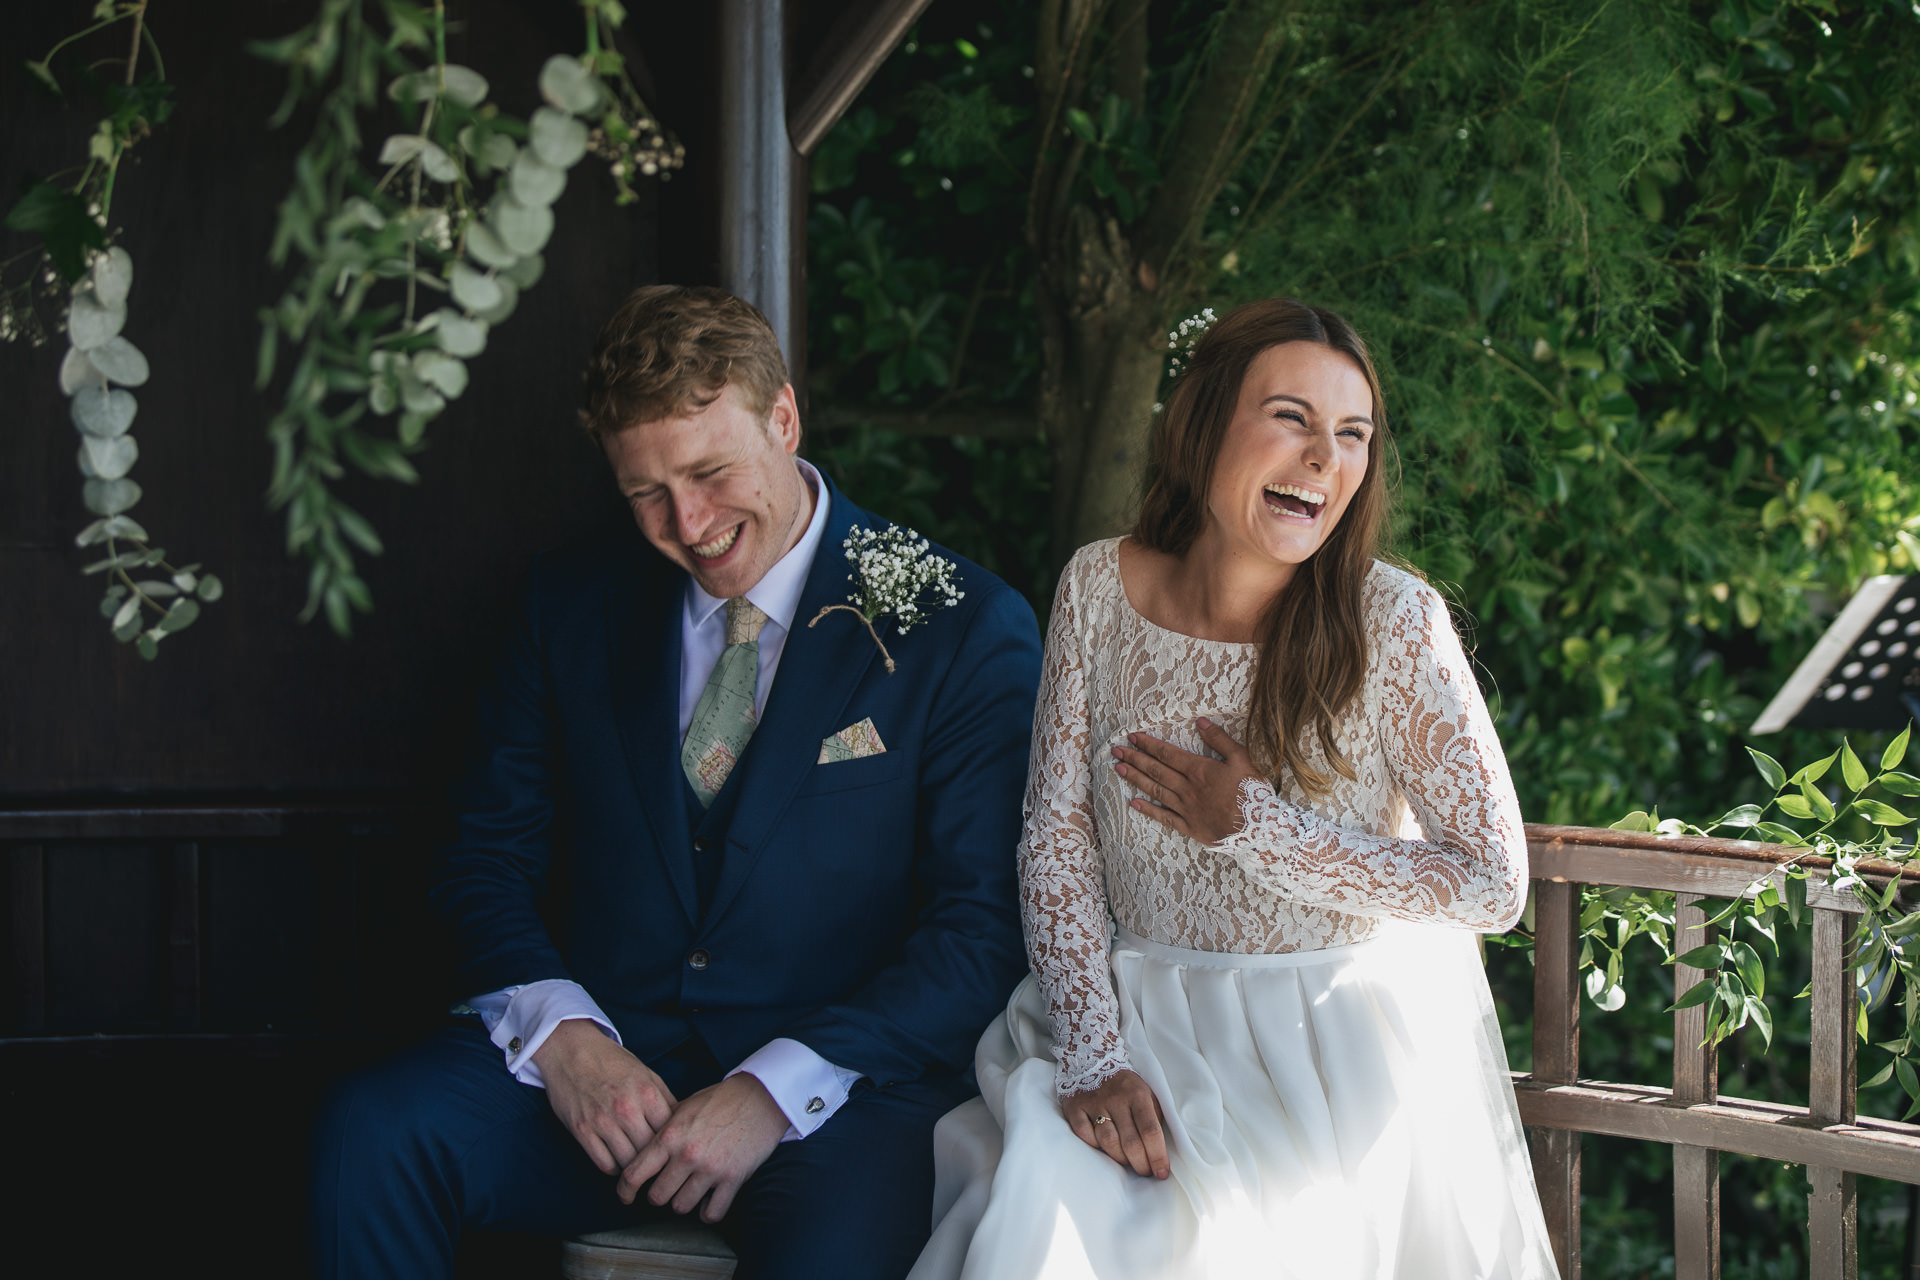 Bride and groom laughing during outdoor wedding ceremony